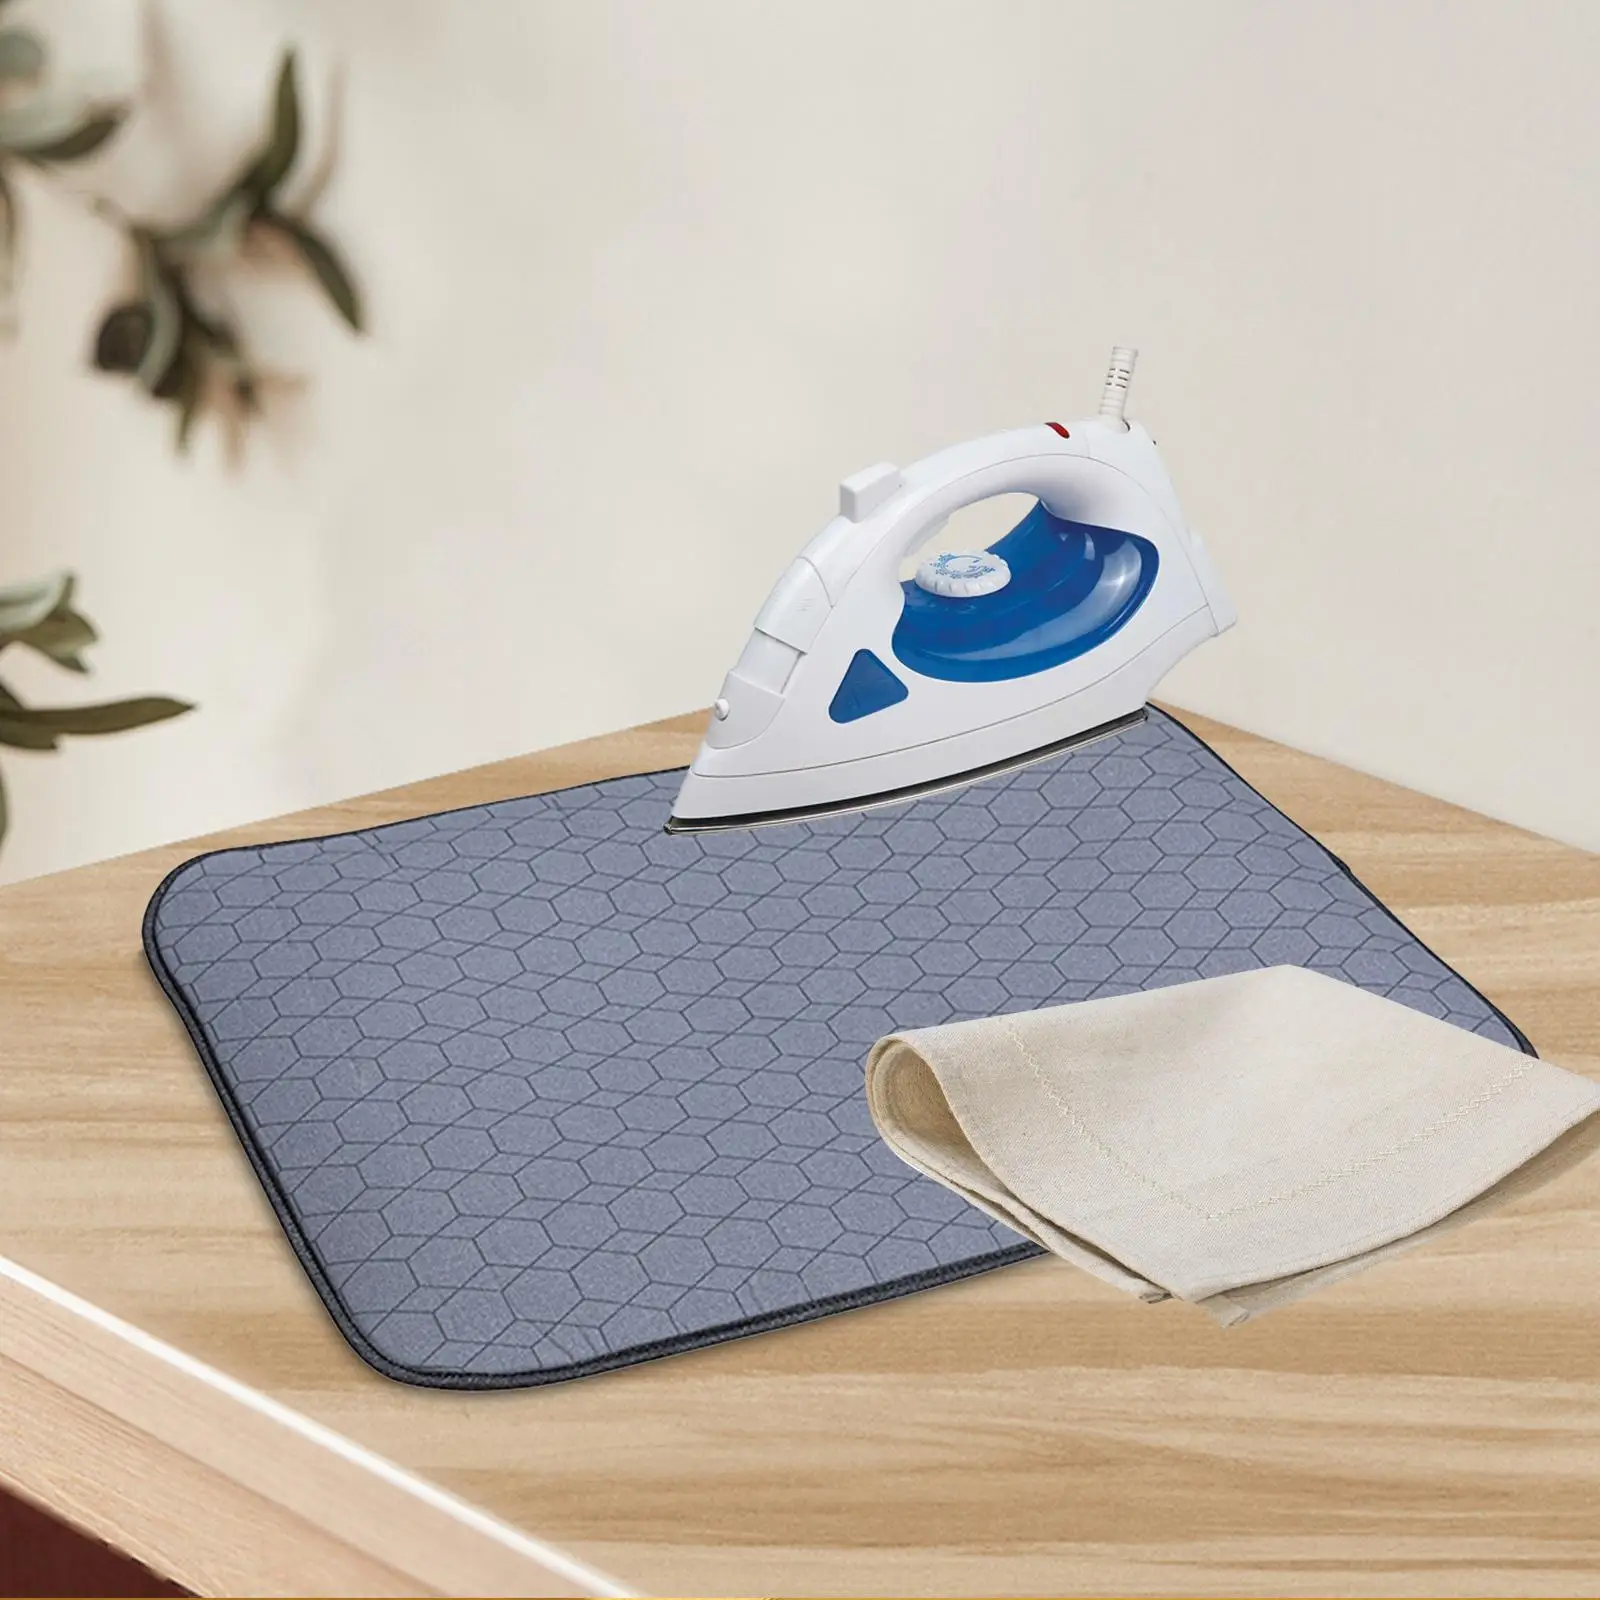 Ironing Mat Foldable Portable Stain Resistant Portable Tabletop Iron Board for Dorm Laundry Room Travel Sewing Room Collars